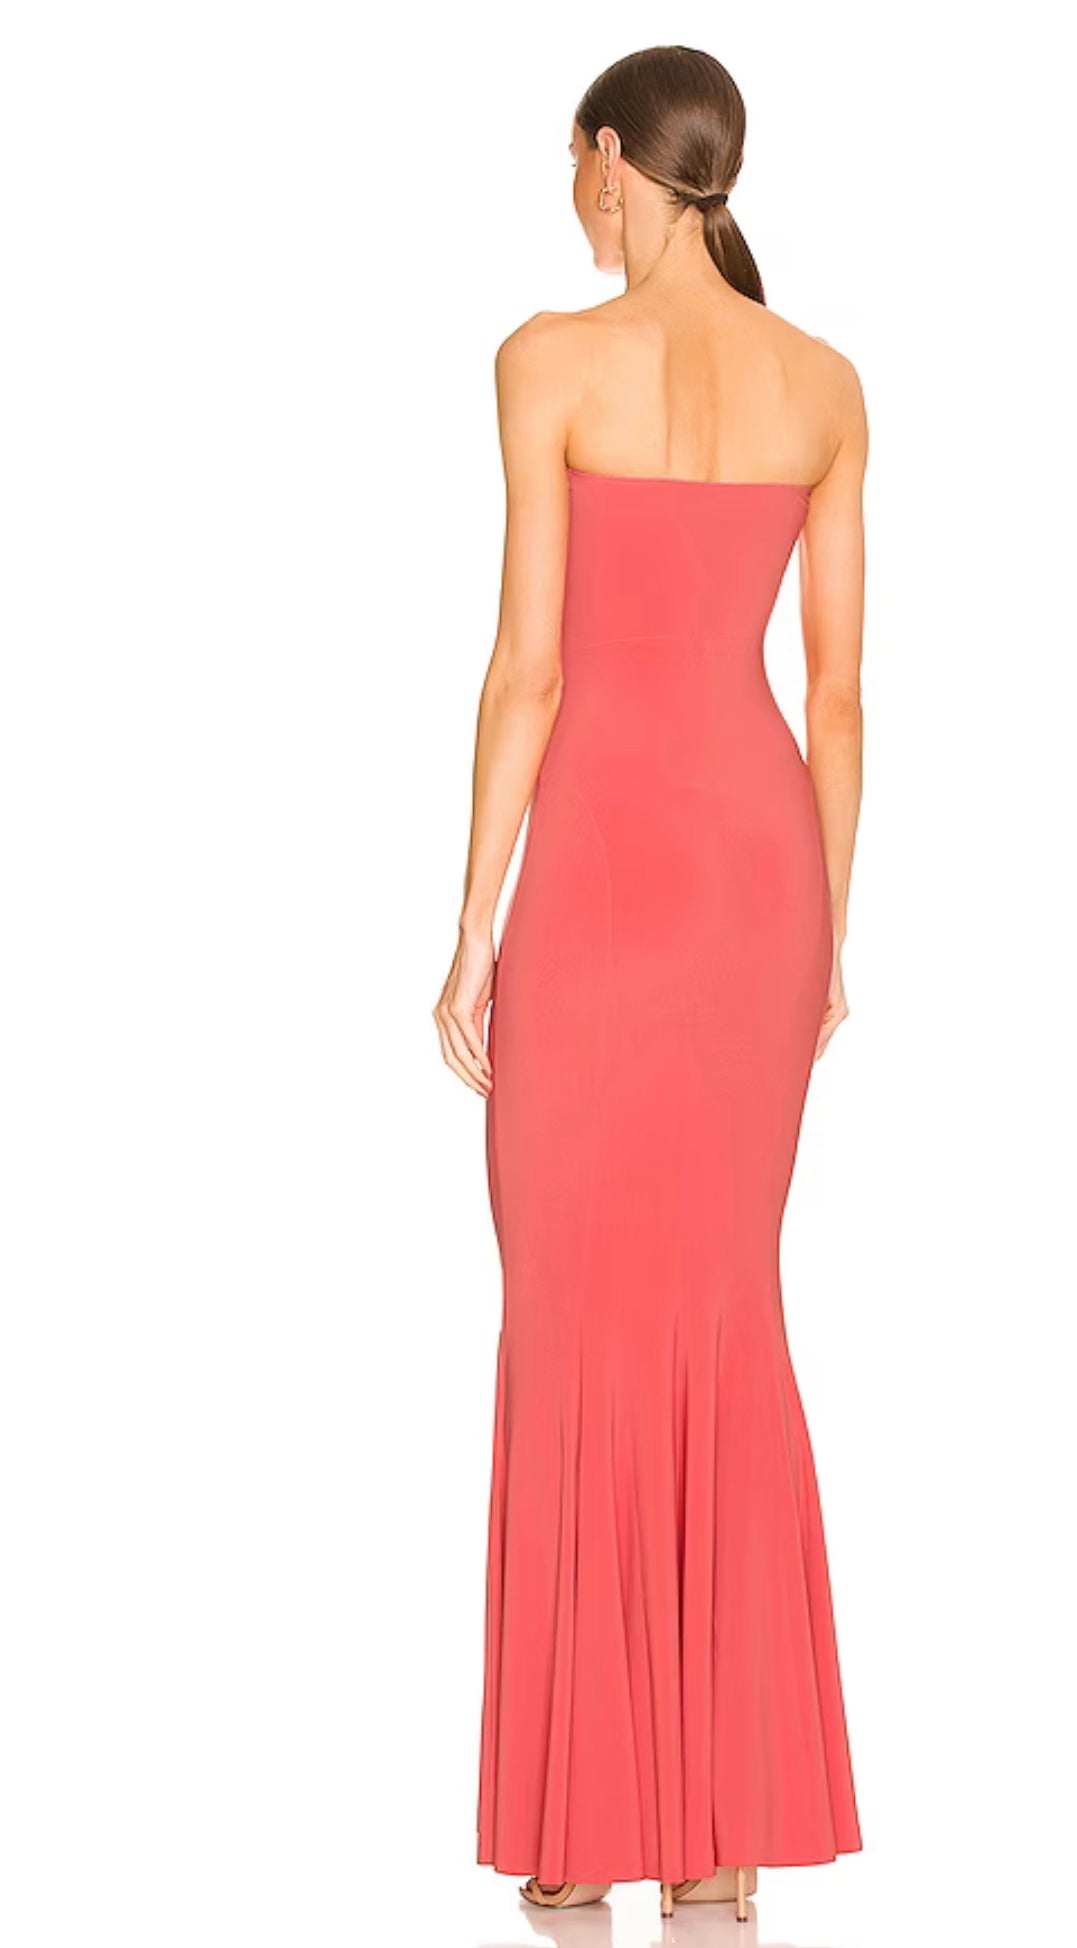 Norma Kamali Strapless Fishtail Gown Coral